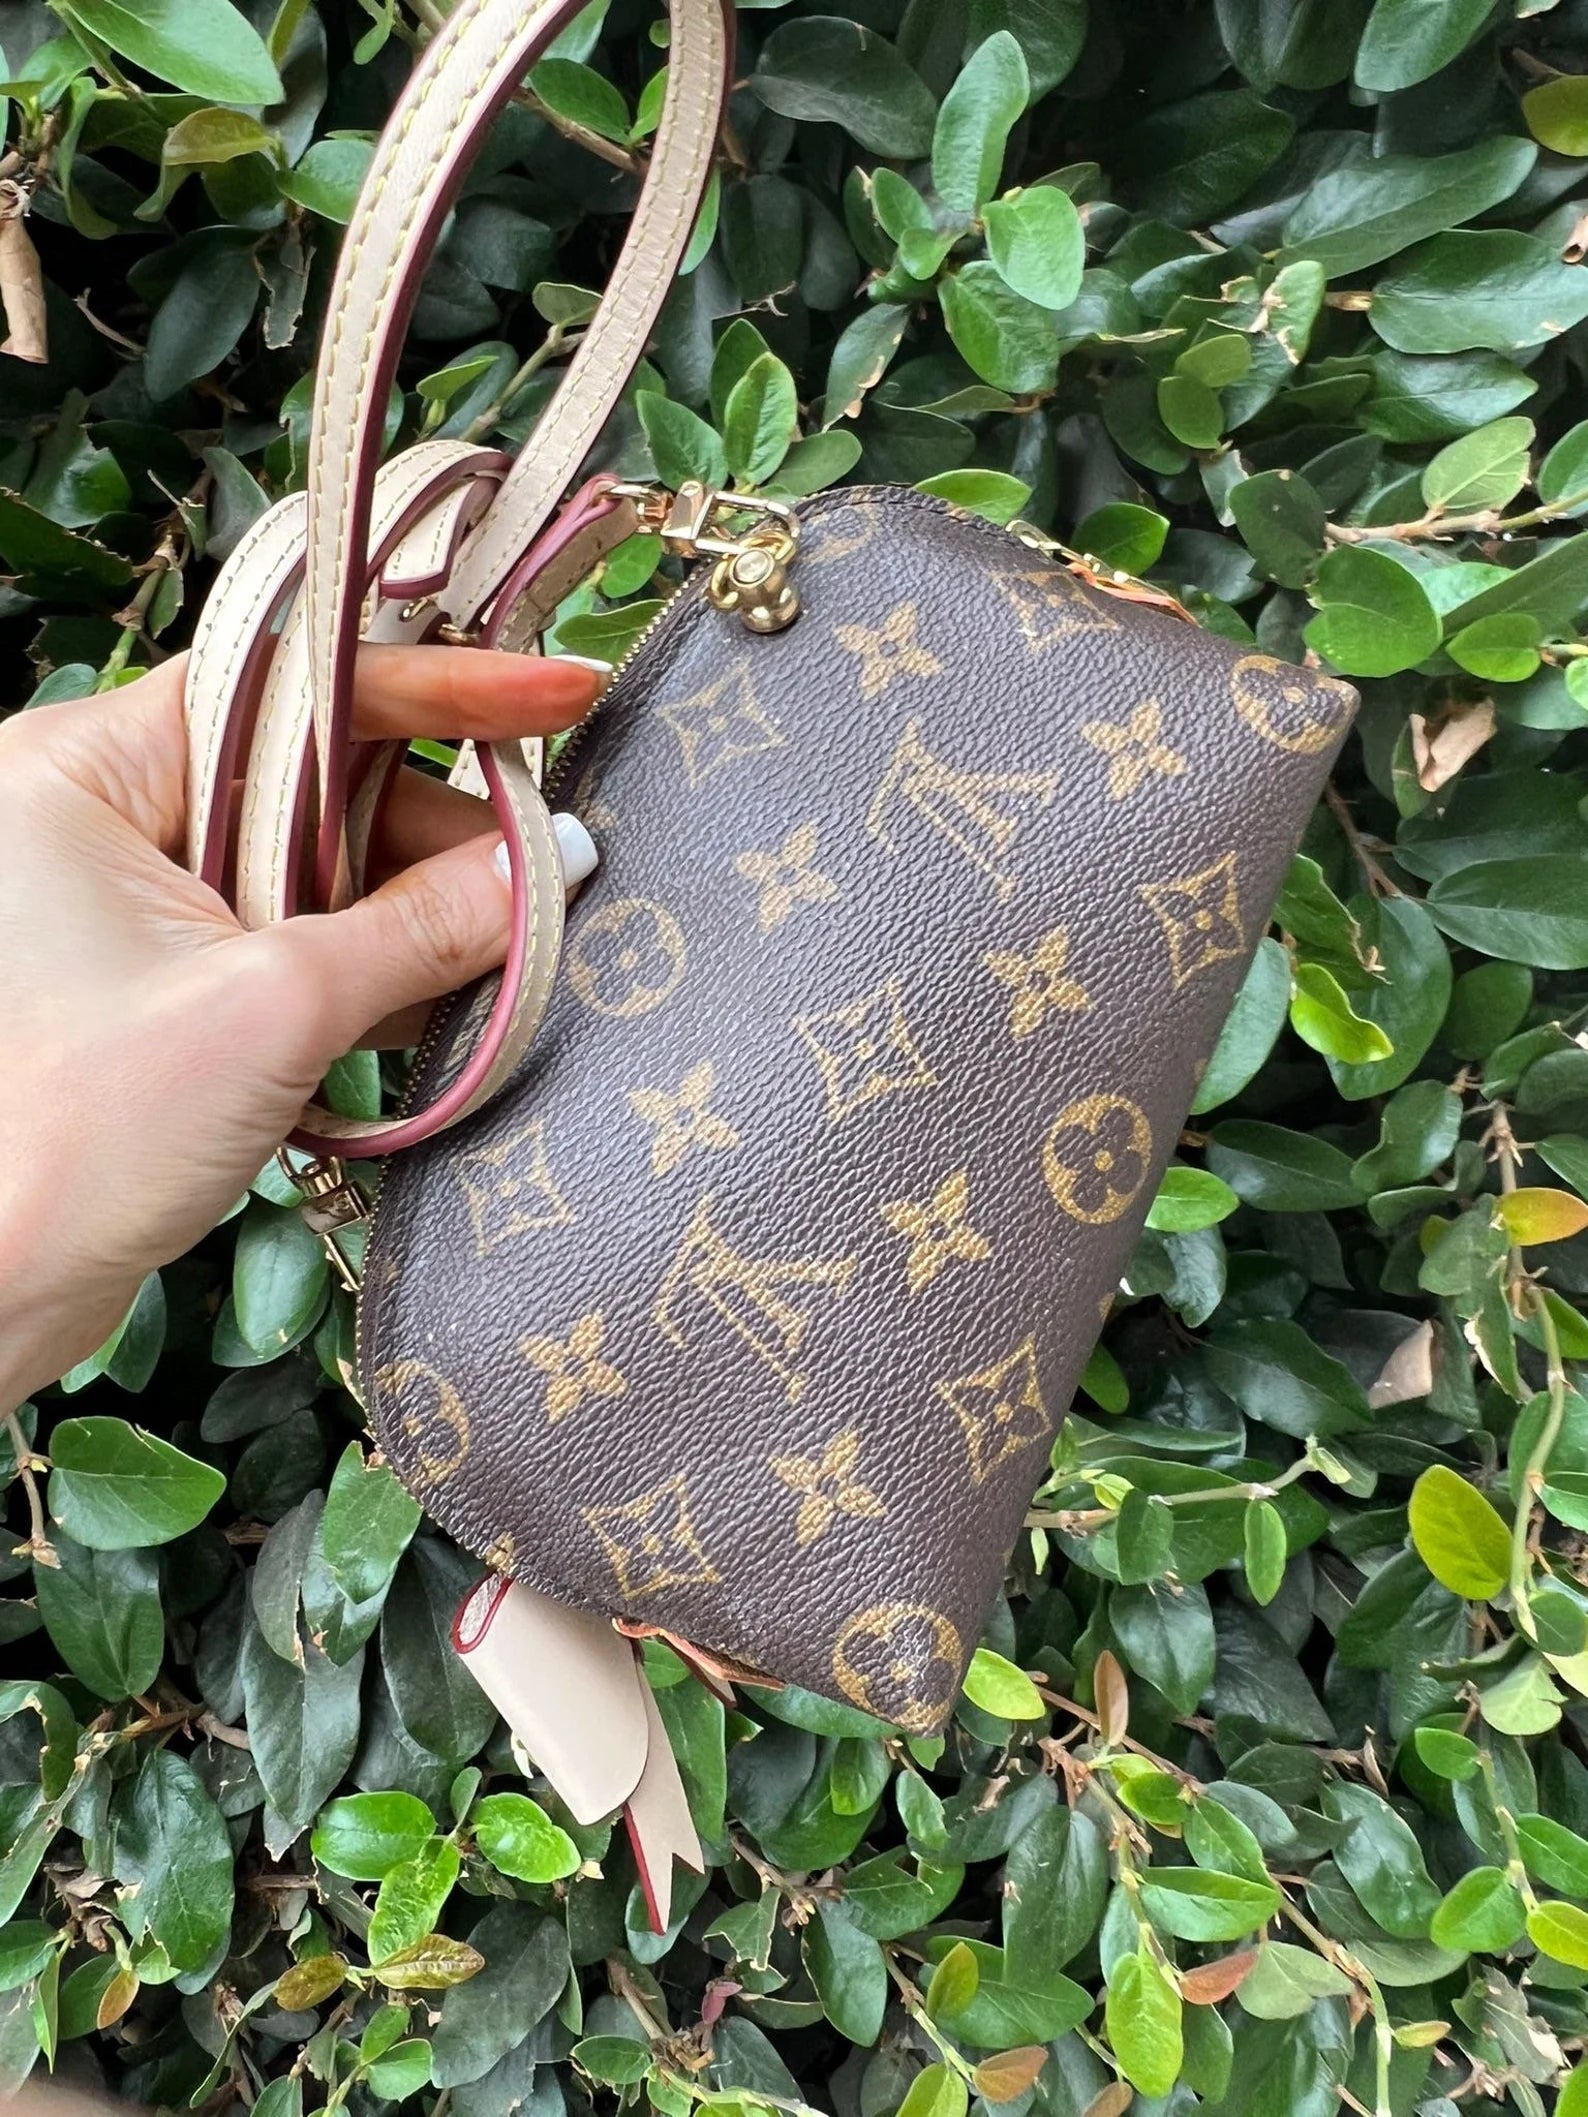 Shop Louis Vuitton Leather Logo Pouches & Cosmetic Bags by